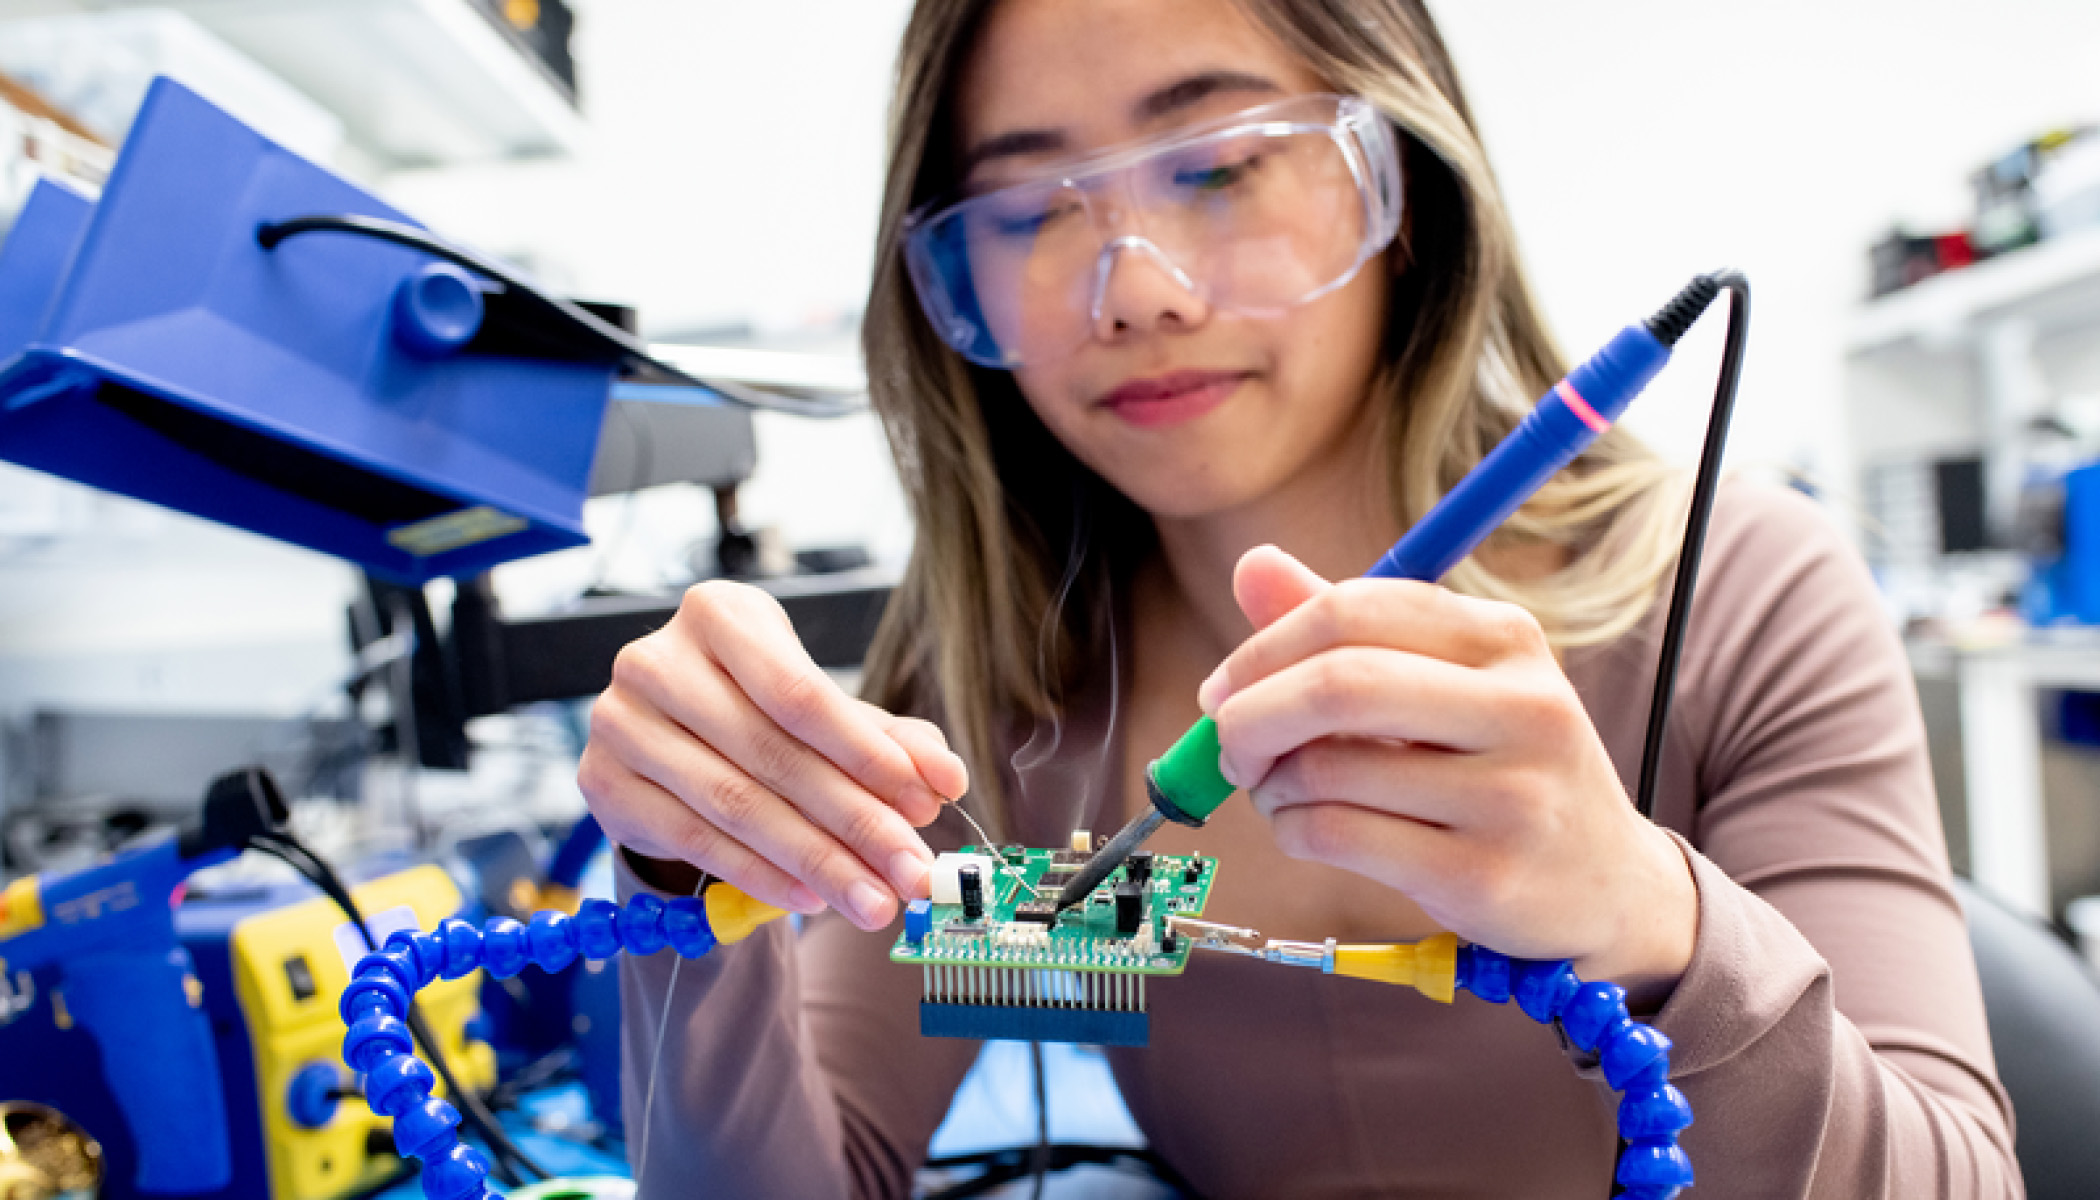 A scientist in a lab wearing clear safety glasses uses both hands to work on a circuit board.